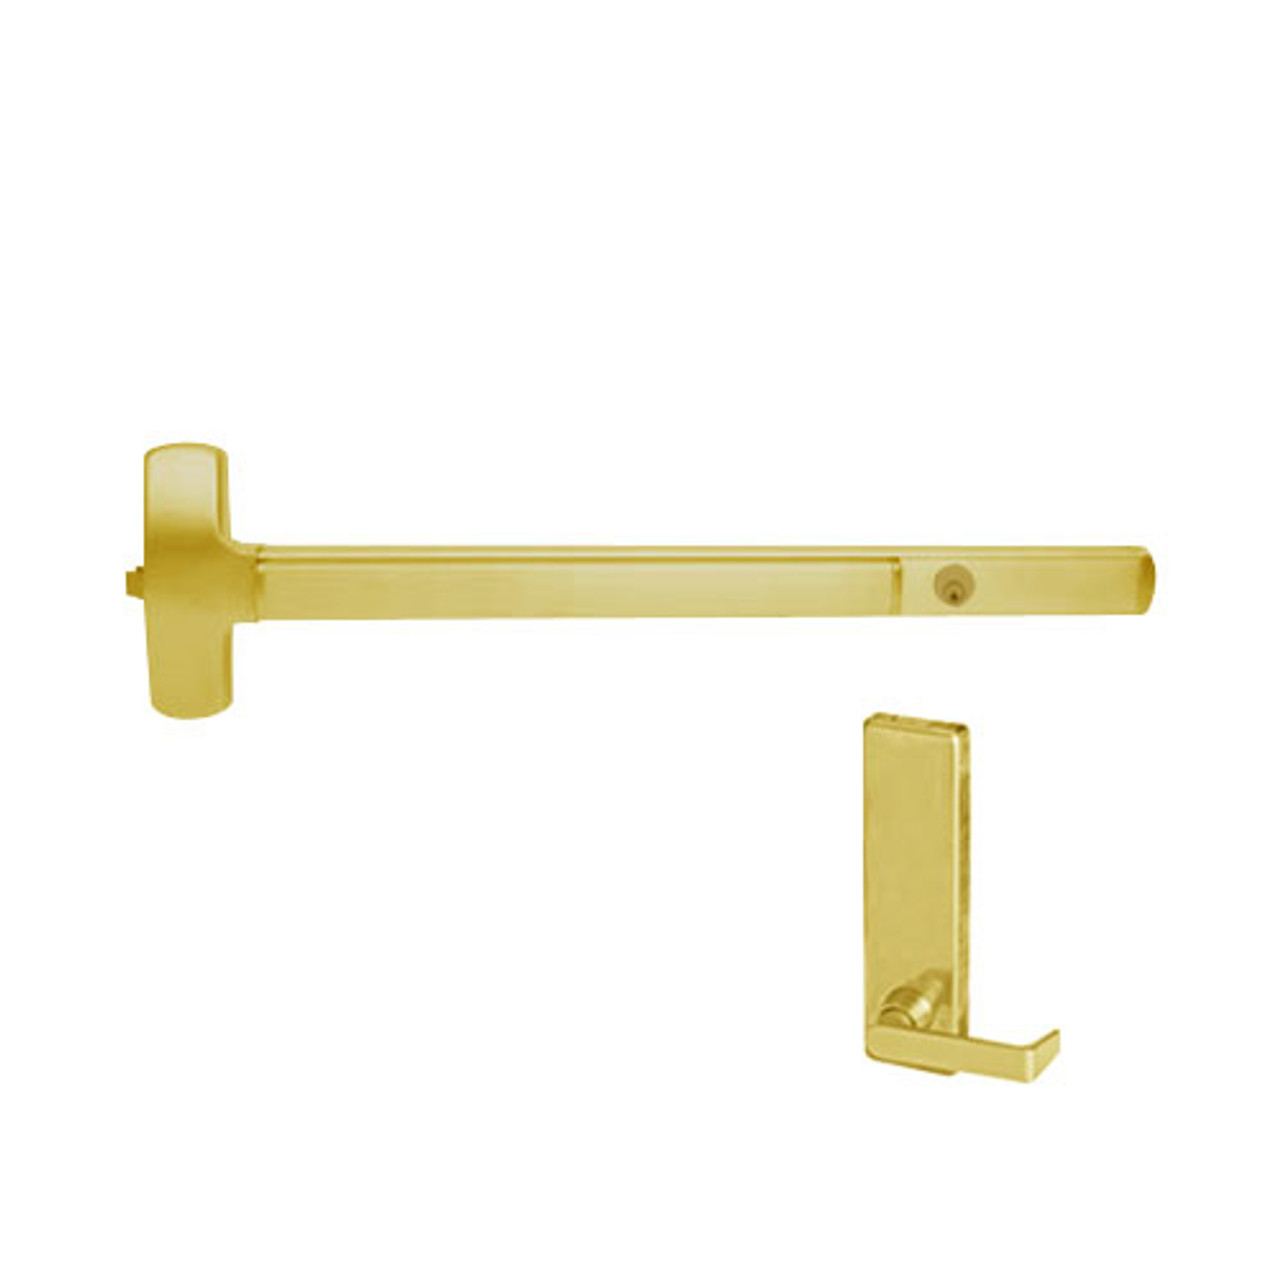 CD25-R-L-BE-DANE-US4-3-LHR Falcon Exit Device in Satin Brass